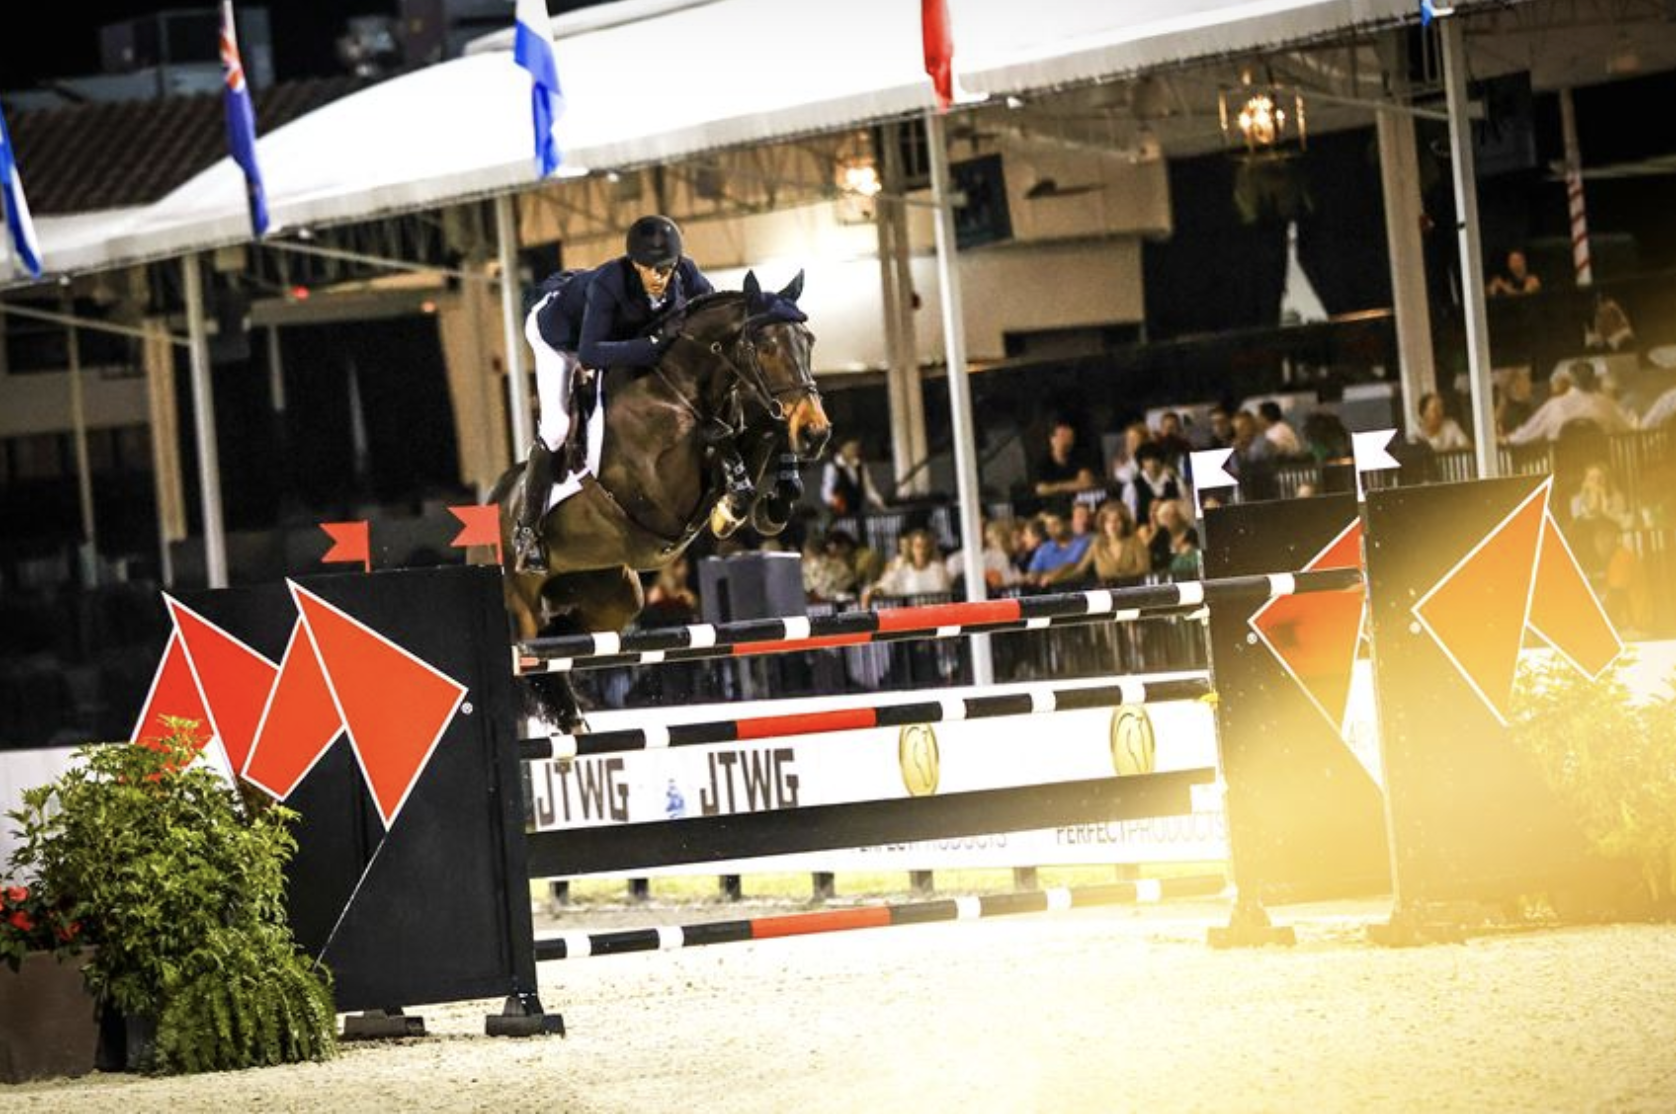 Rene Dittmer’s Luck Runs Strong in $226,000 Holiday & Horses CSI4* Grand Prix, Sponsored by Keyflow Feeds USA